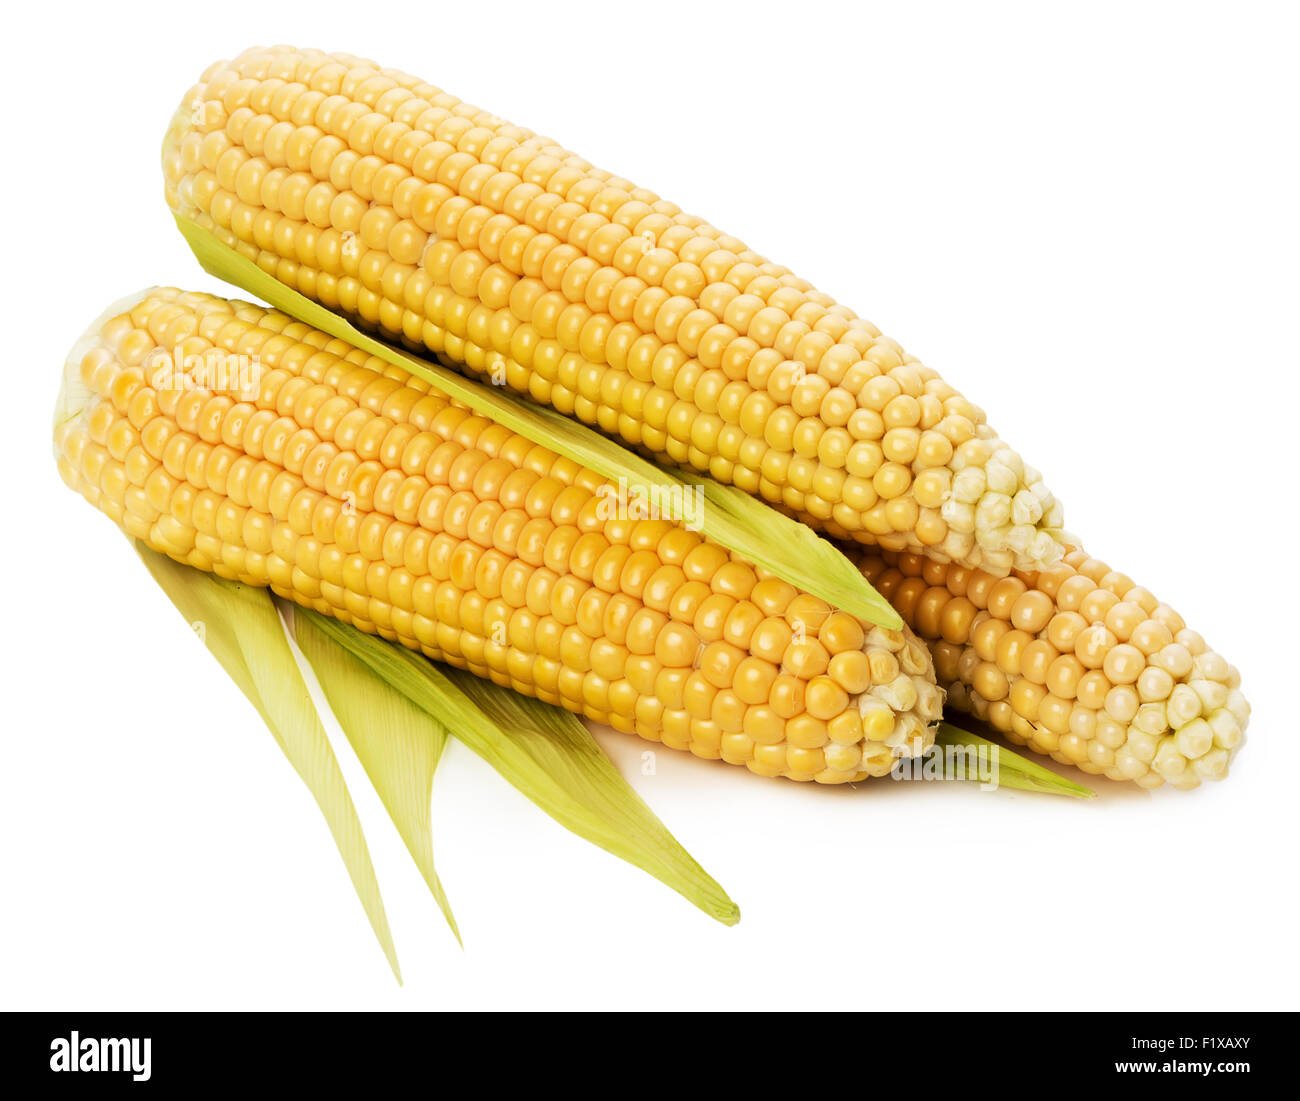 An ear of corn isolated on the white background. Stock Photo